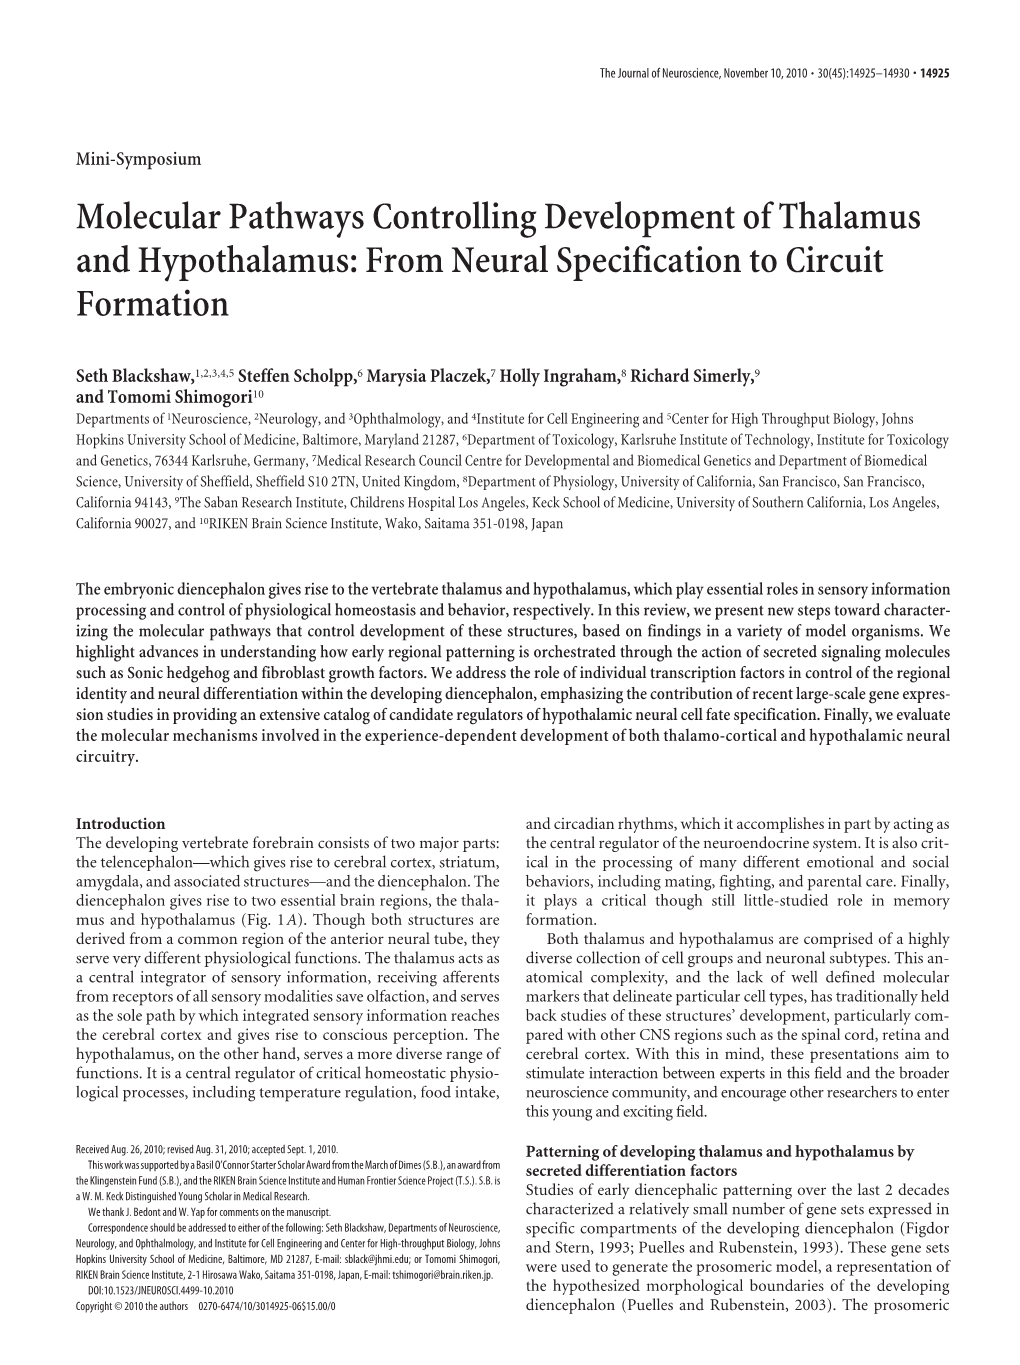 Molecular Pathways Controlling Development of Thalamus and Hypothalamus: from Neural Specification to Circuit Formation